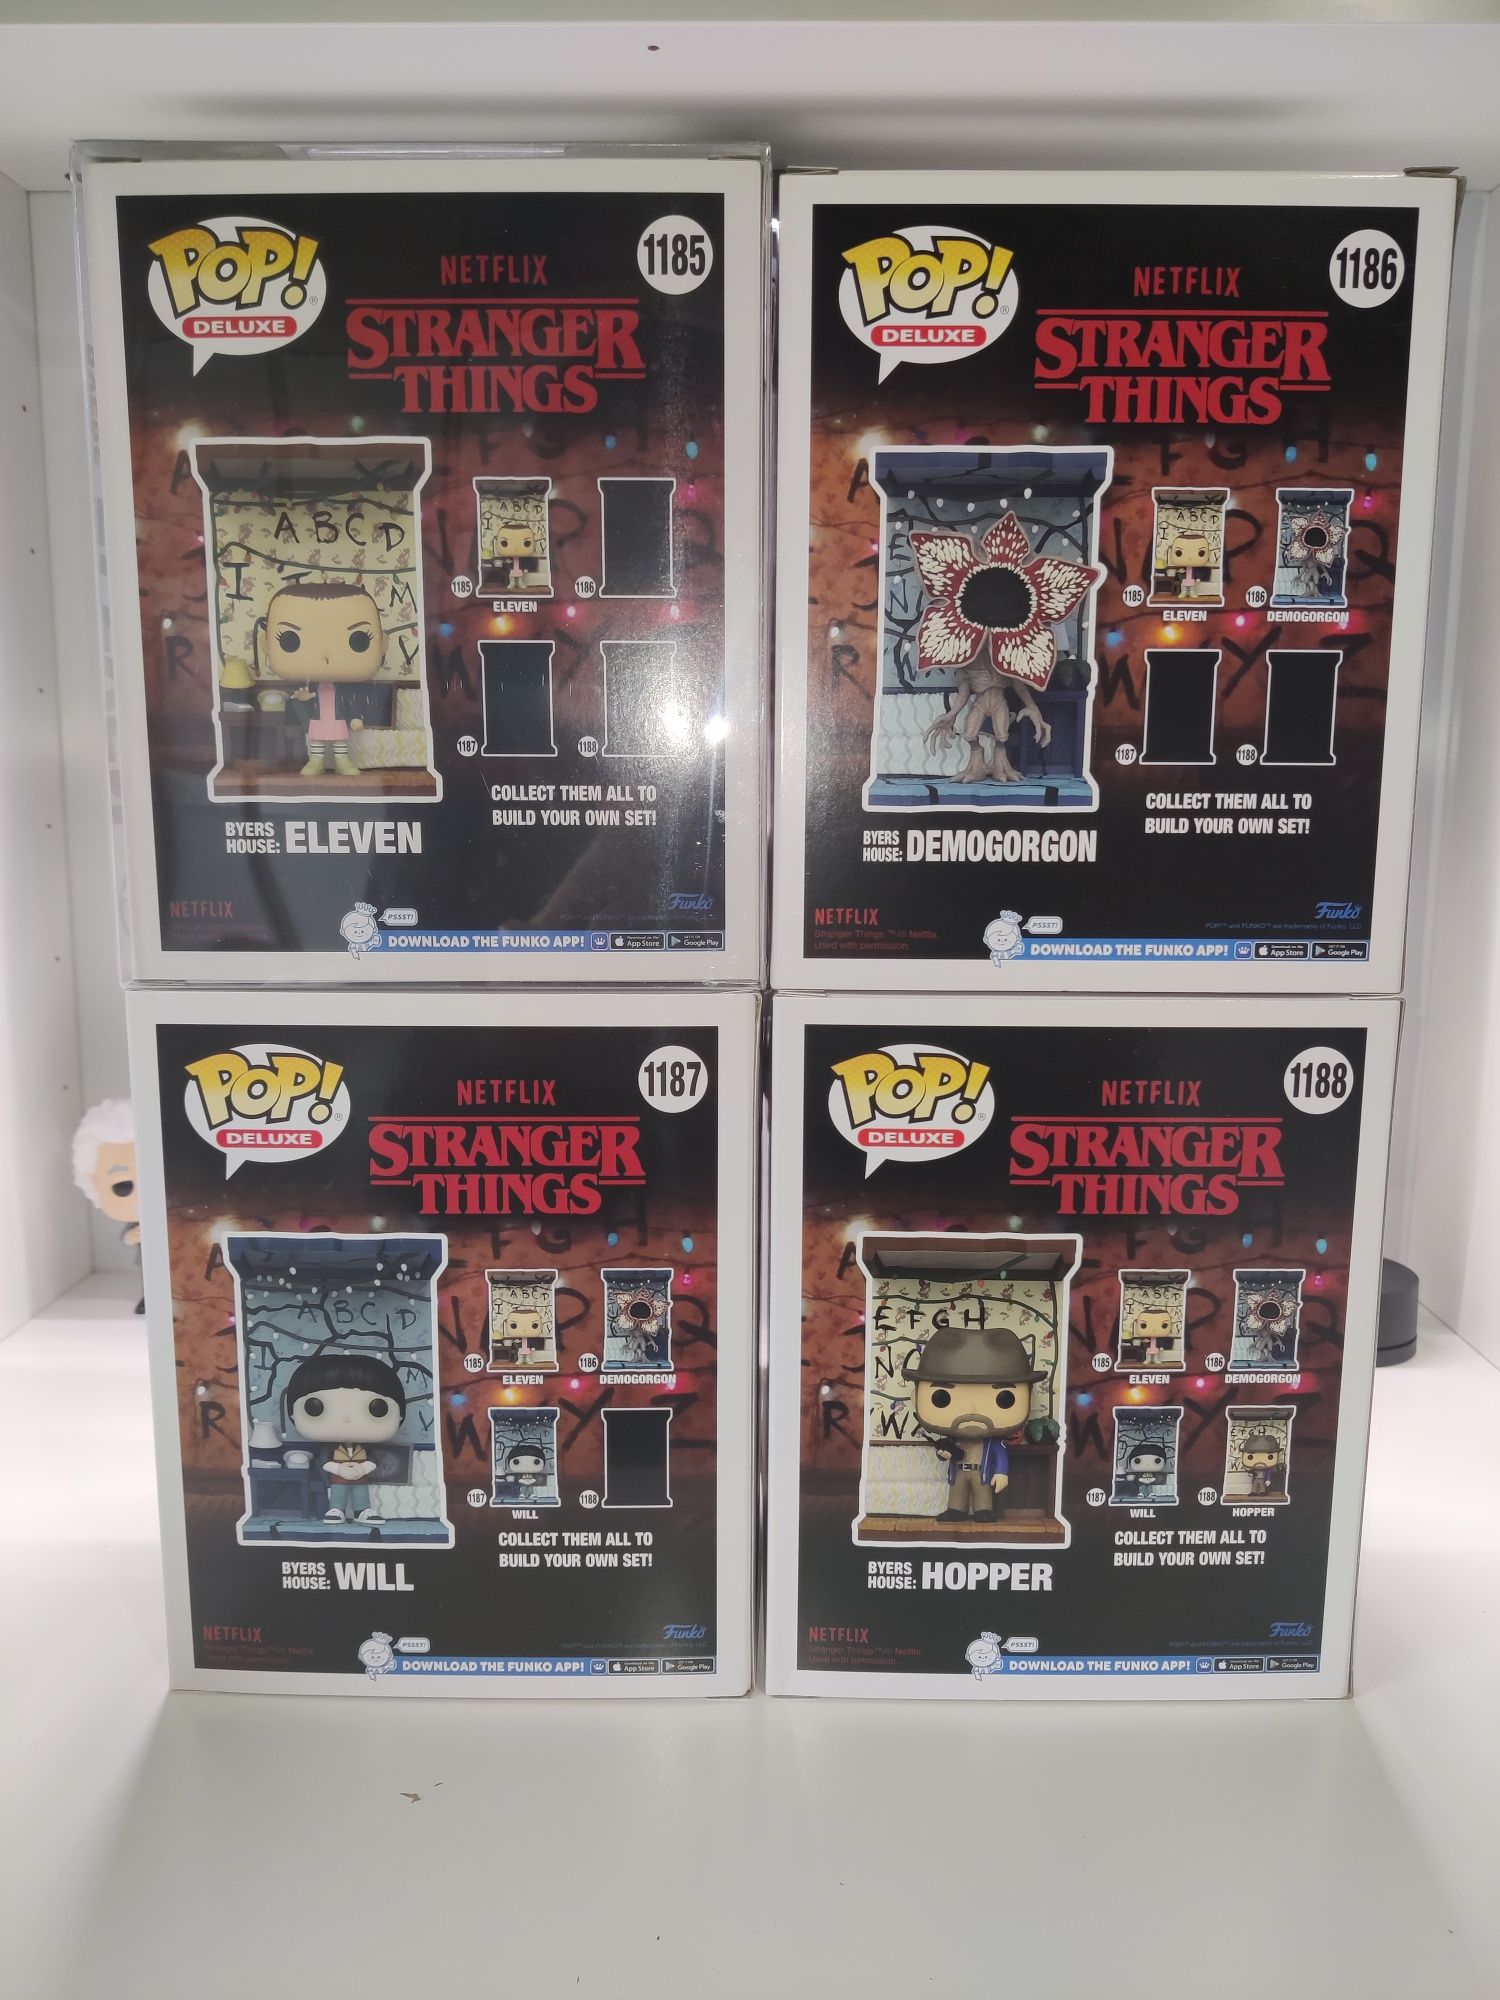 Funko Pop - Stranger Things - Byers House (Amazon Exclusive) - 1/2/3/4